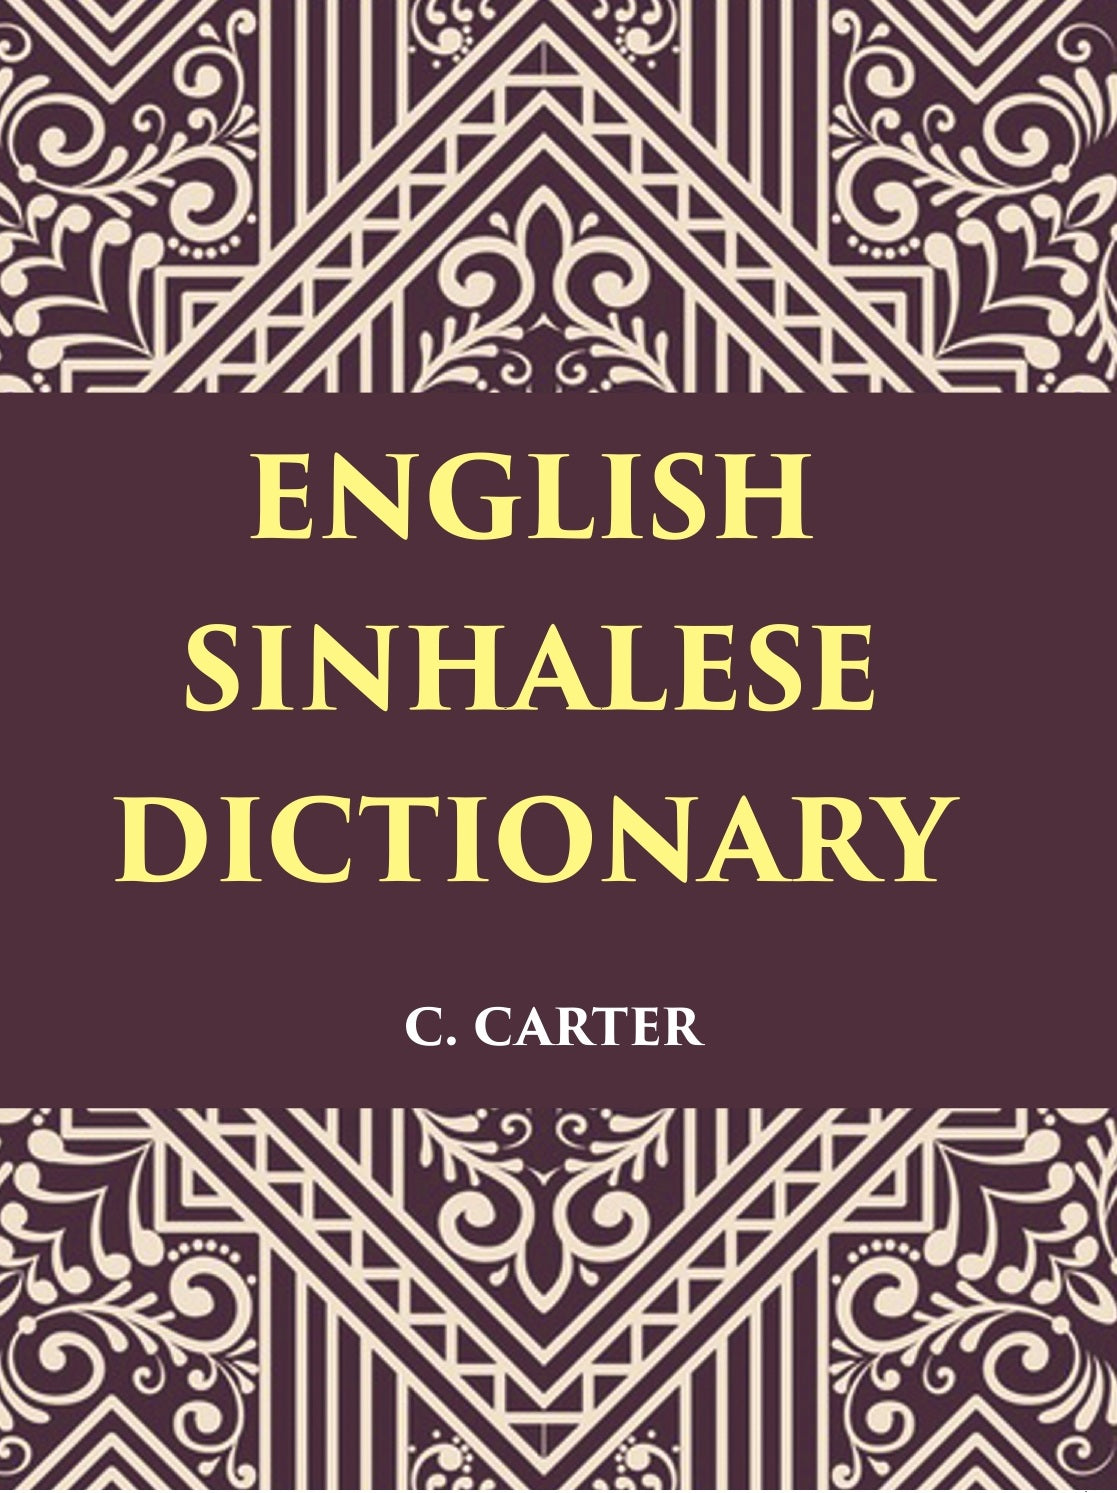 An English Sinhalese Dictionary